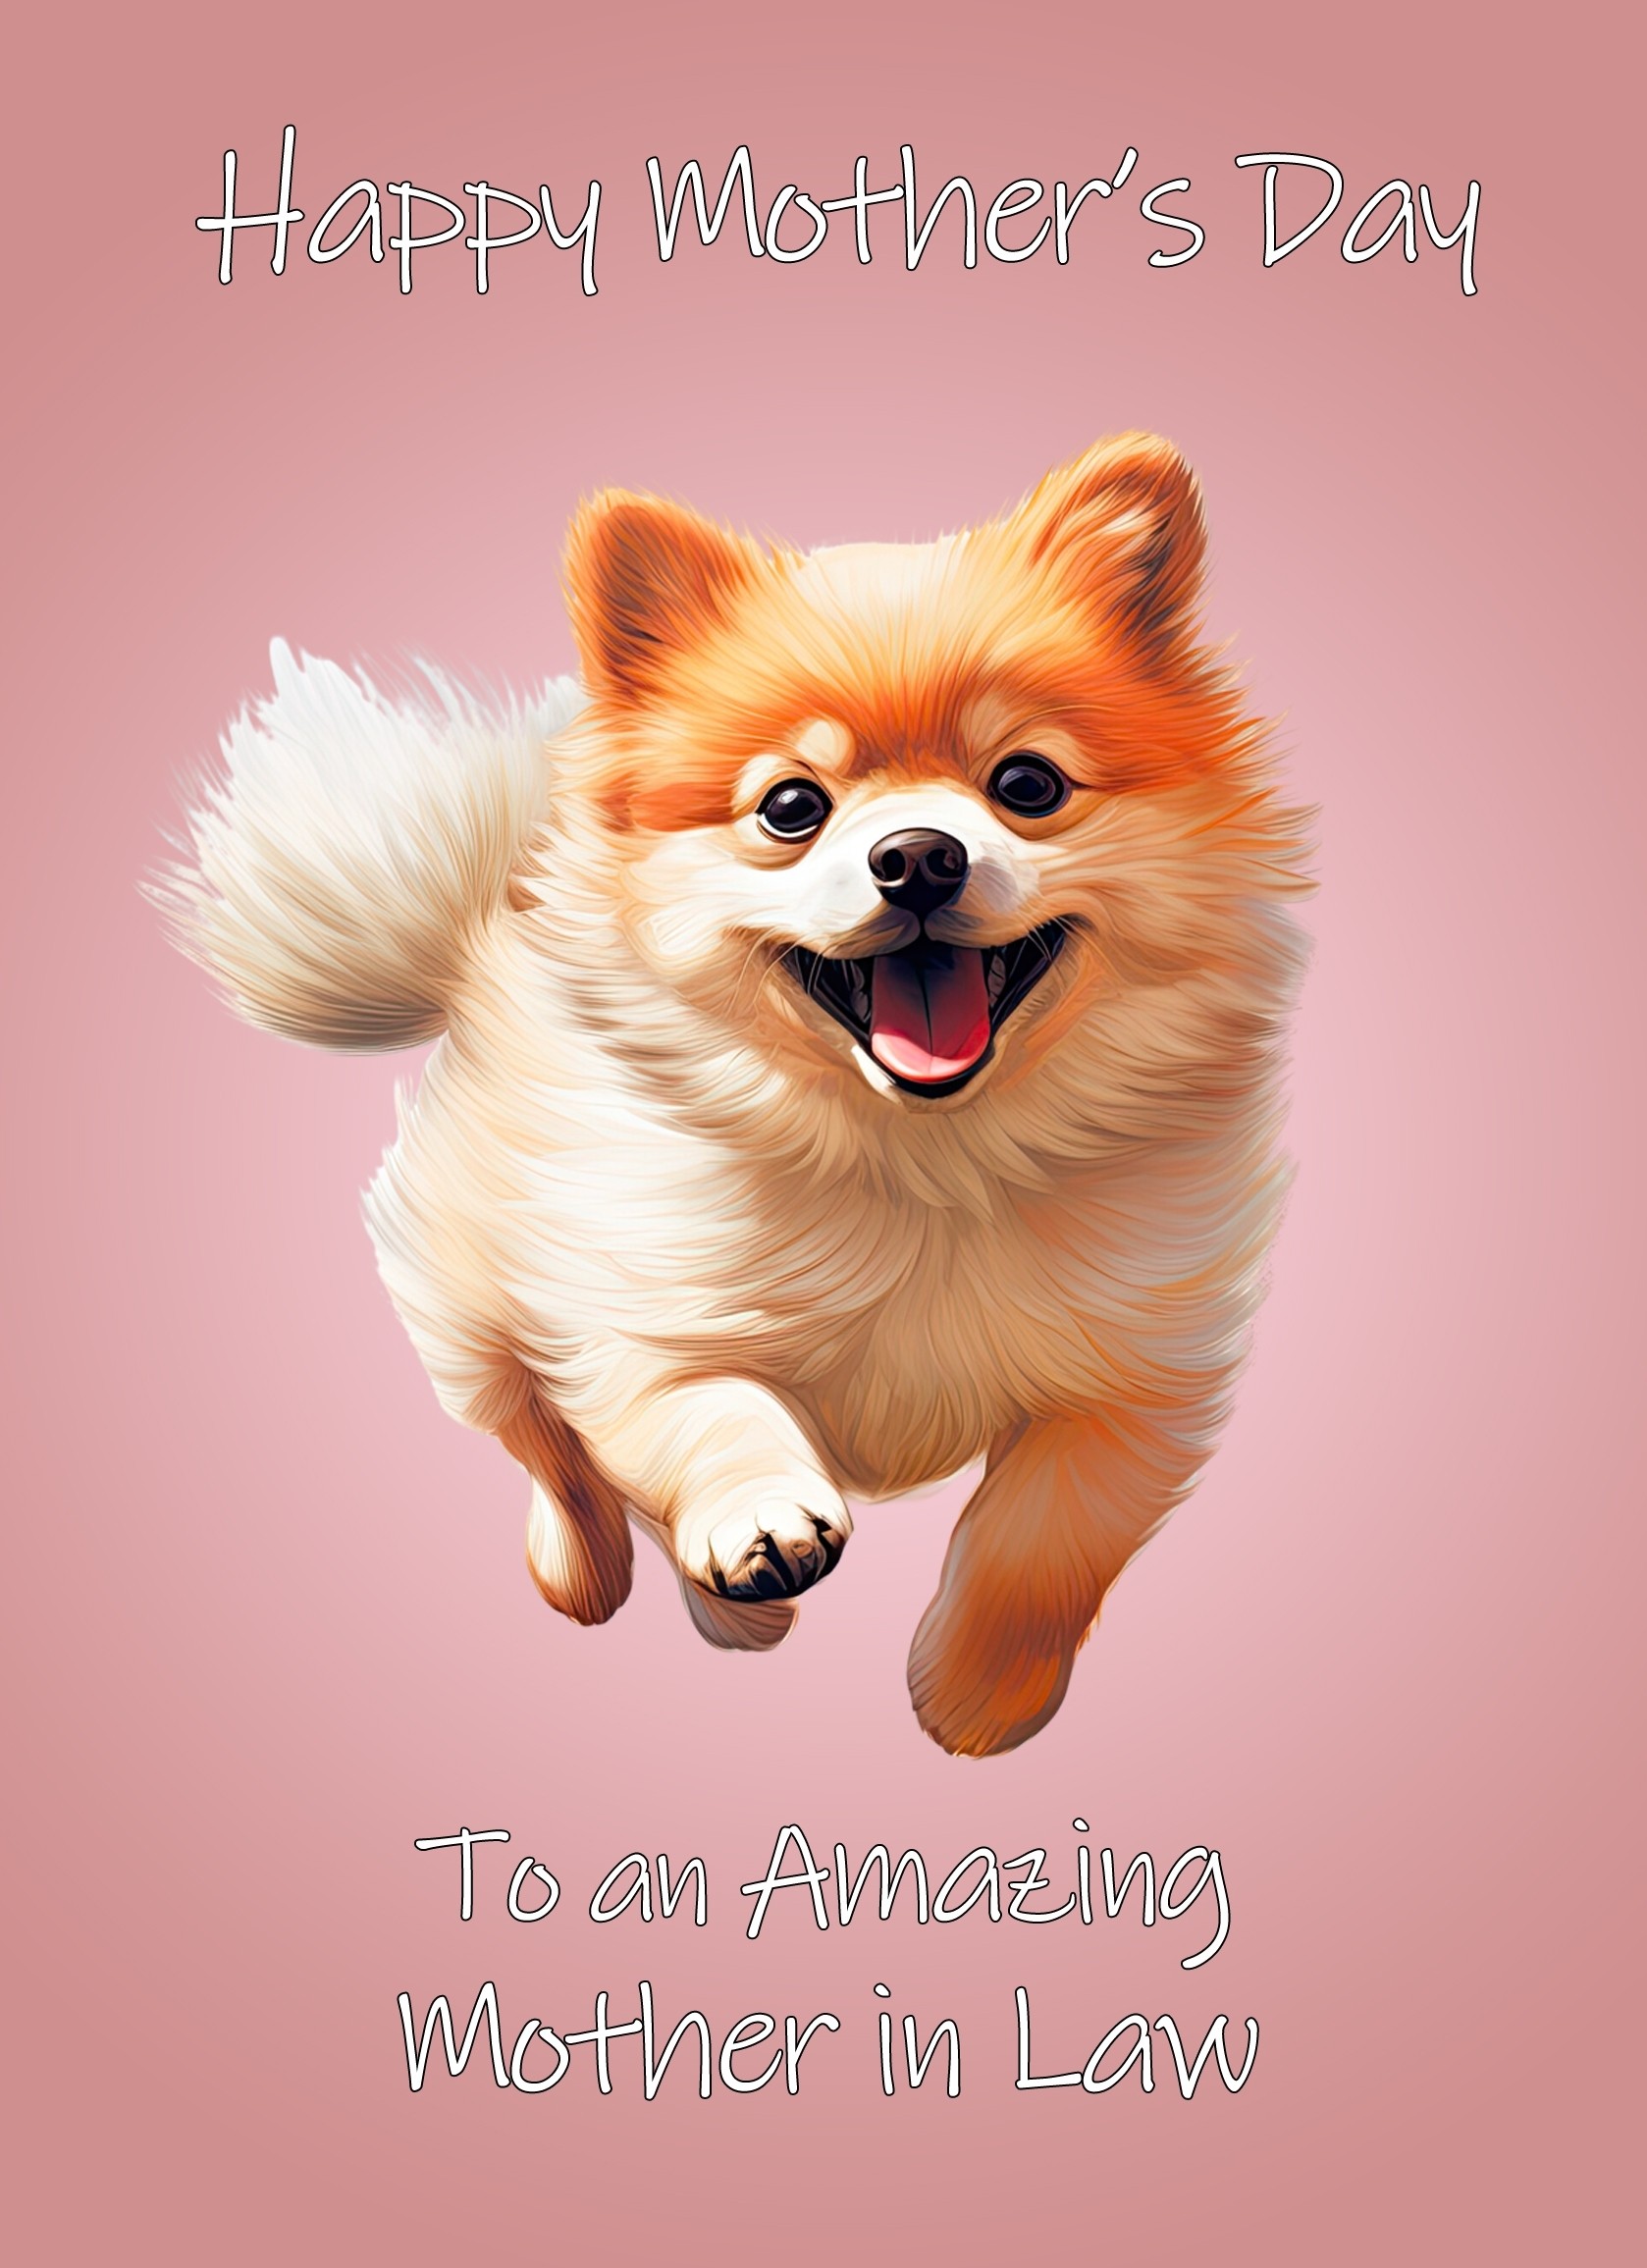 Pomeranian Dog Mothers Day Card For Mother in Law